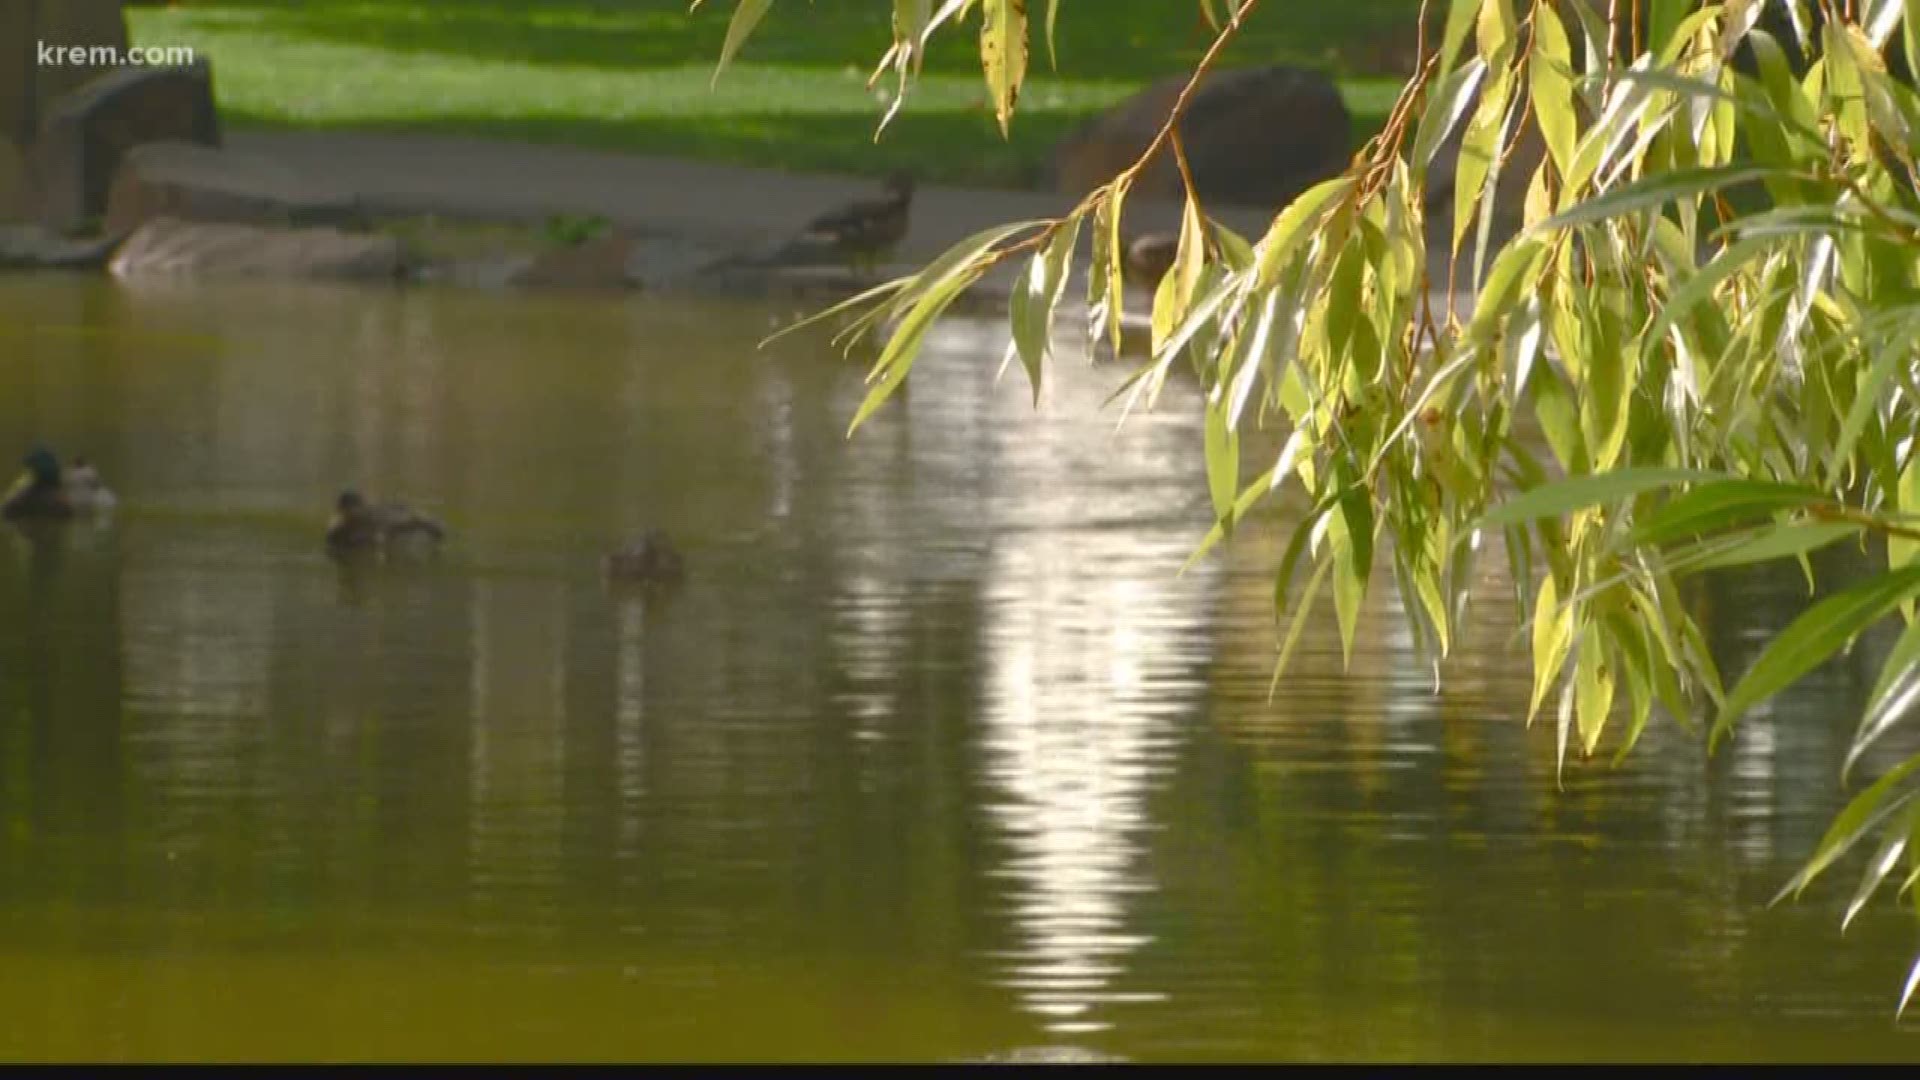 Many people have noticed that the pond looks green. The city of Spokane says it’s because of planktonic algae.